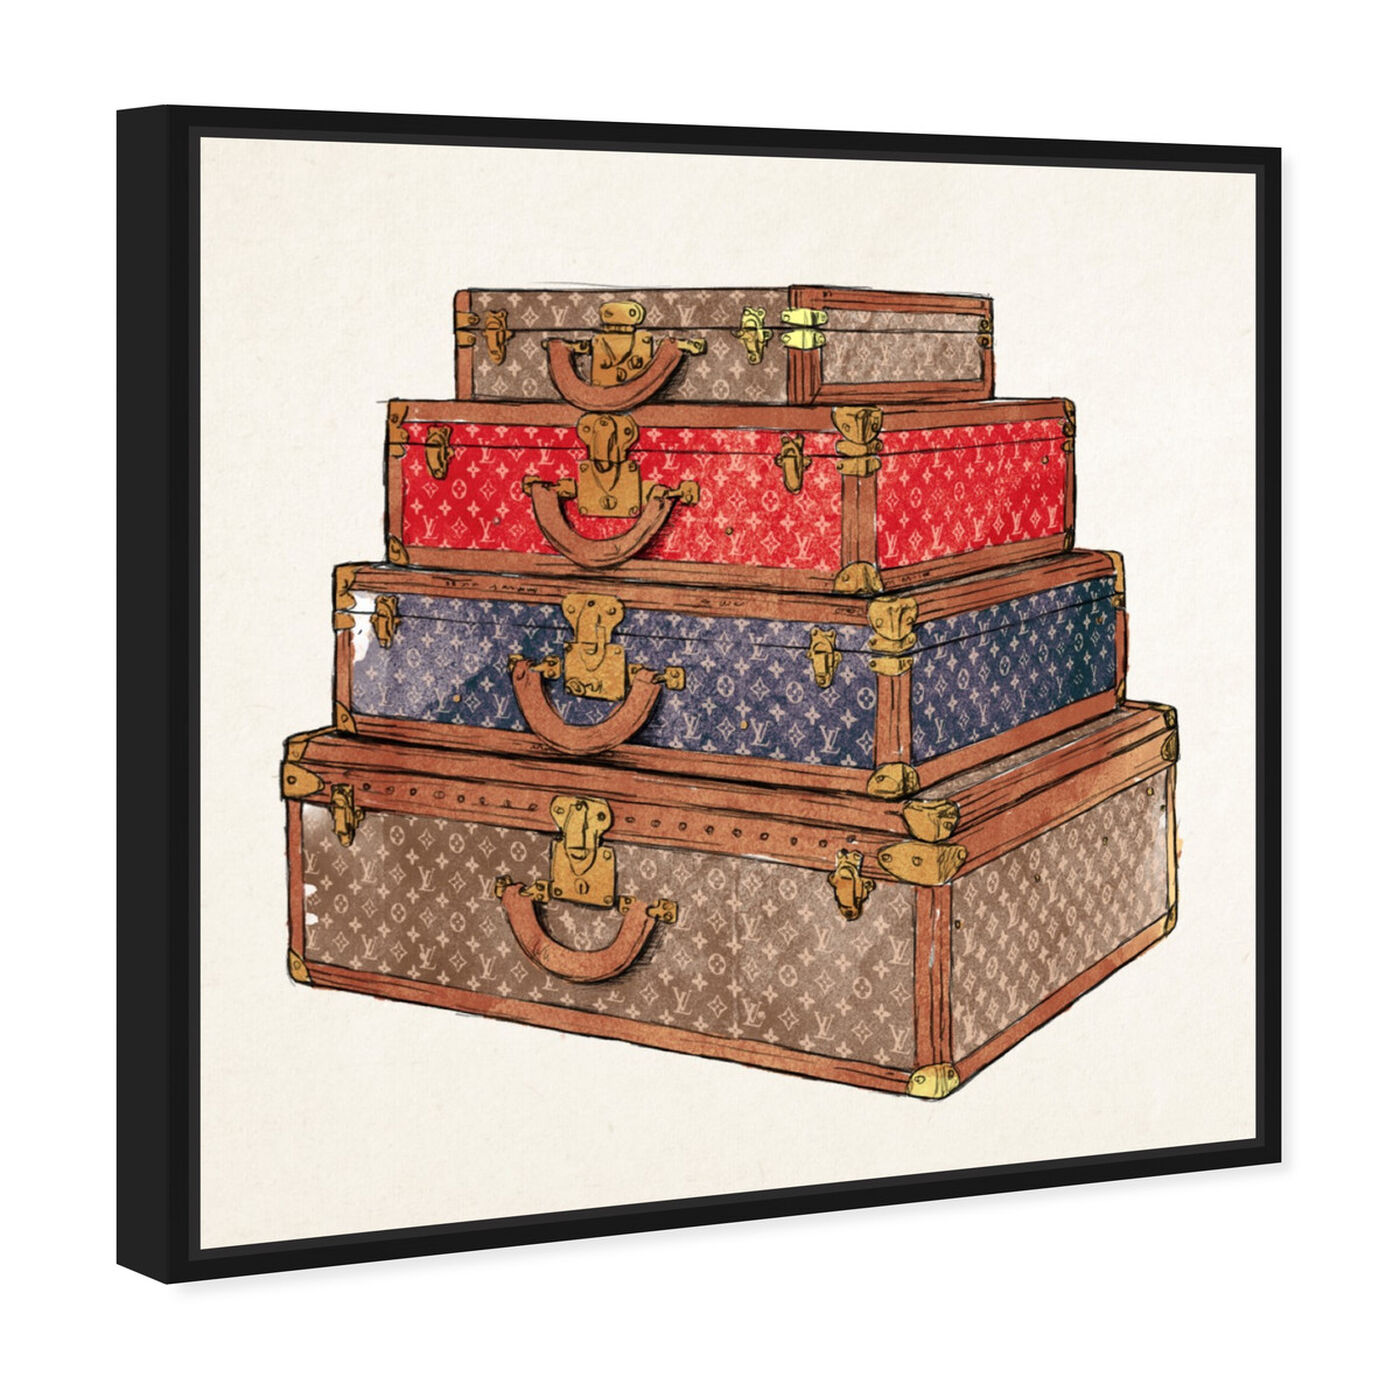 The Royal Luggage  Fashion and Glam Wall Art by Oliver Gal